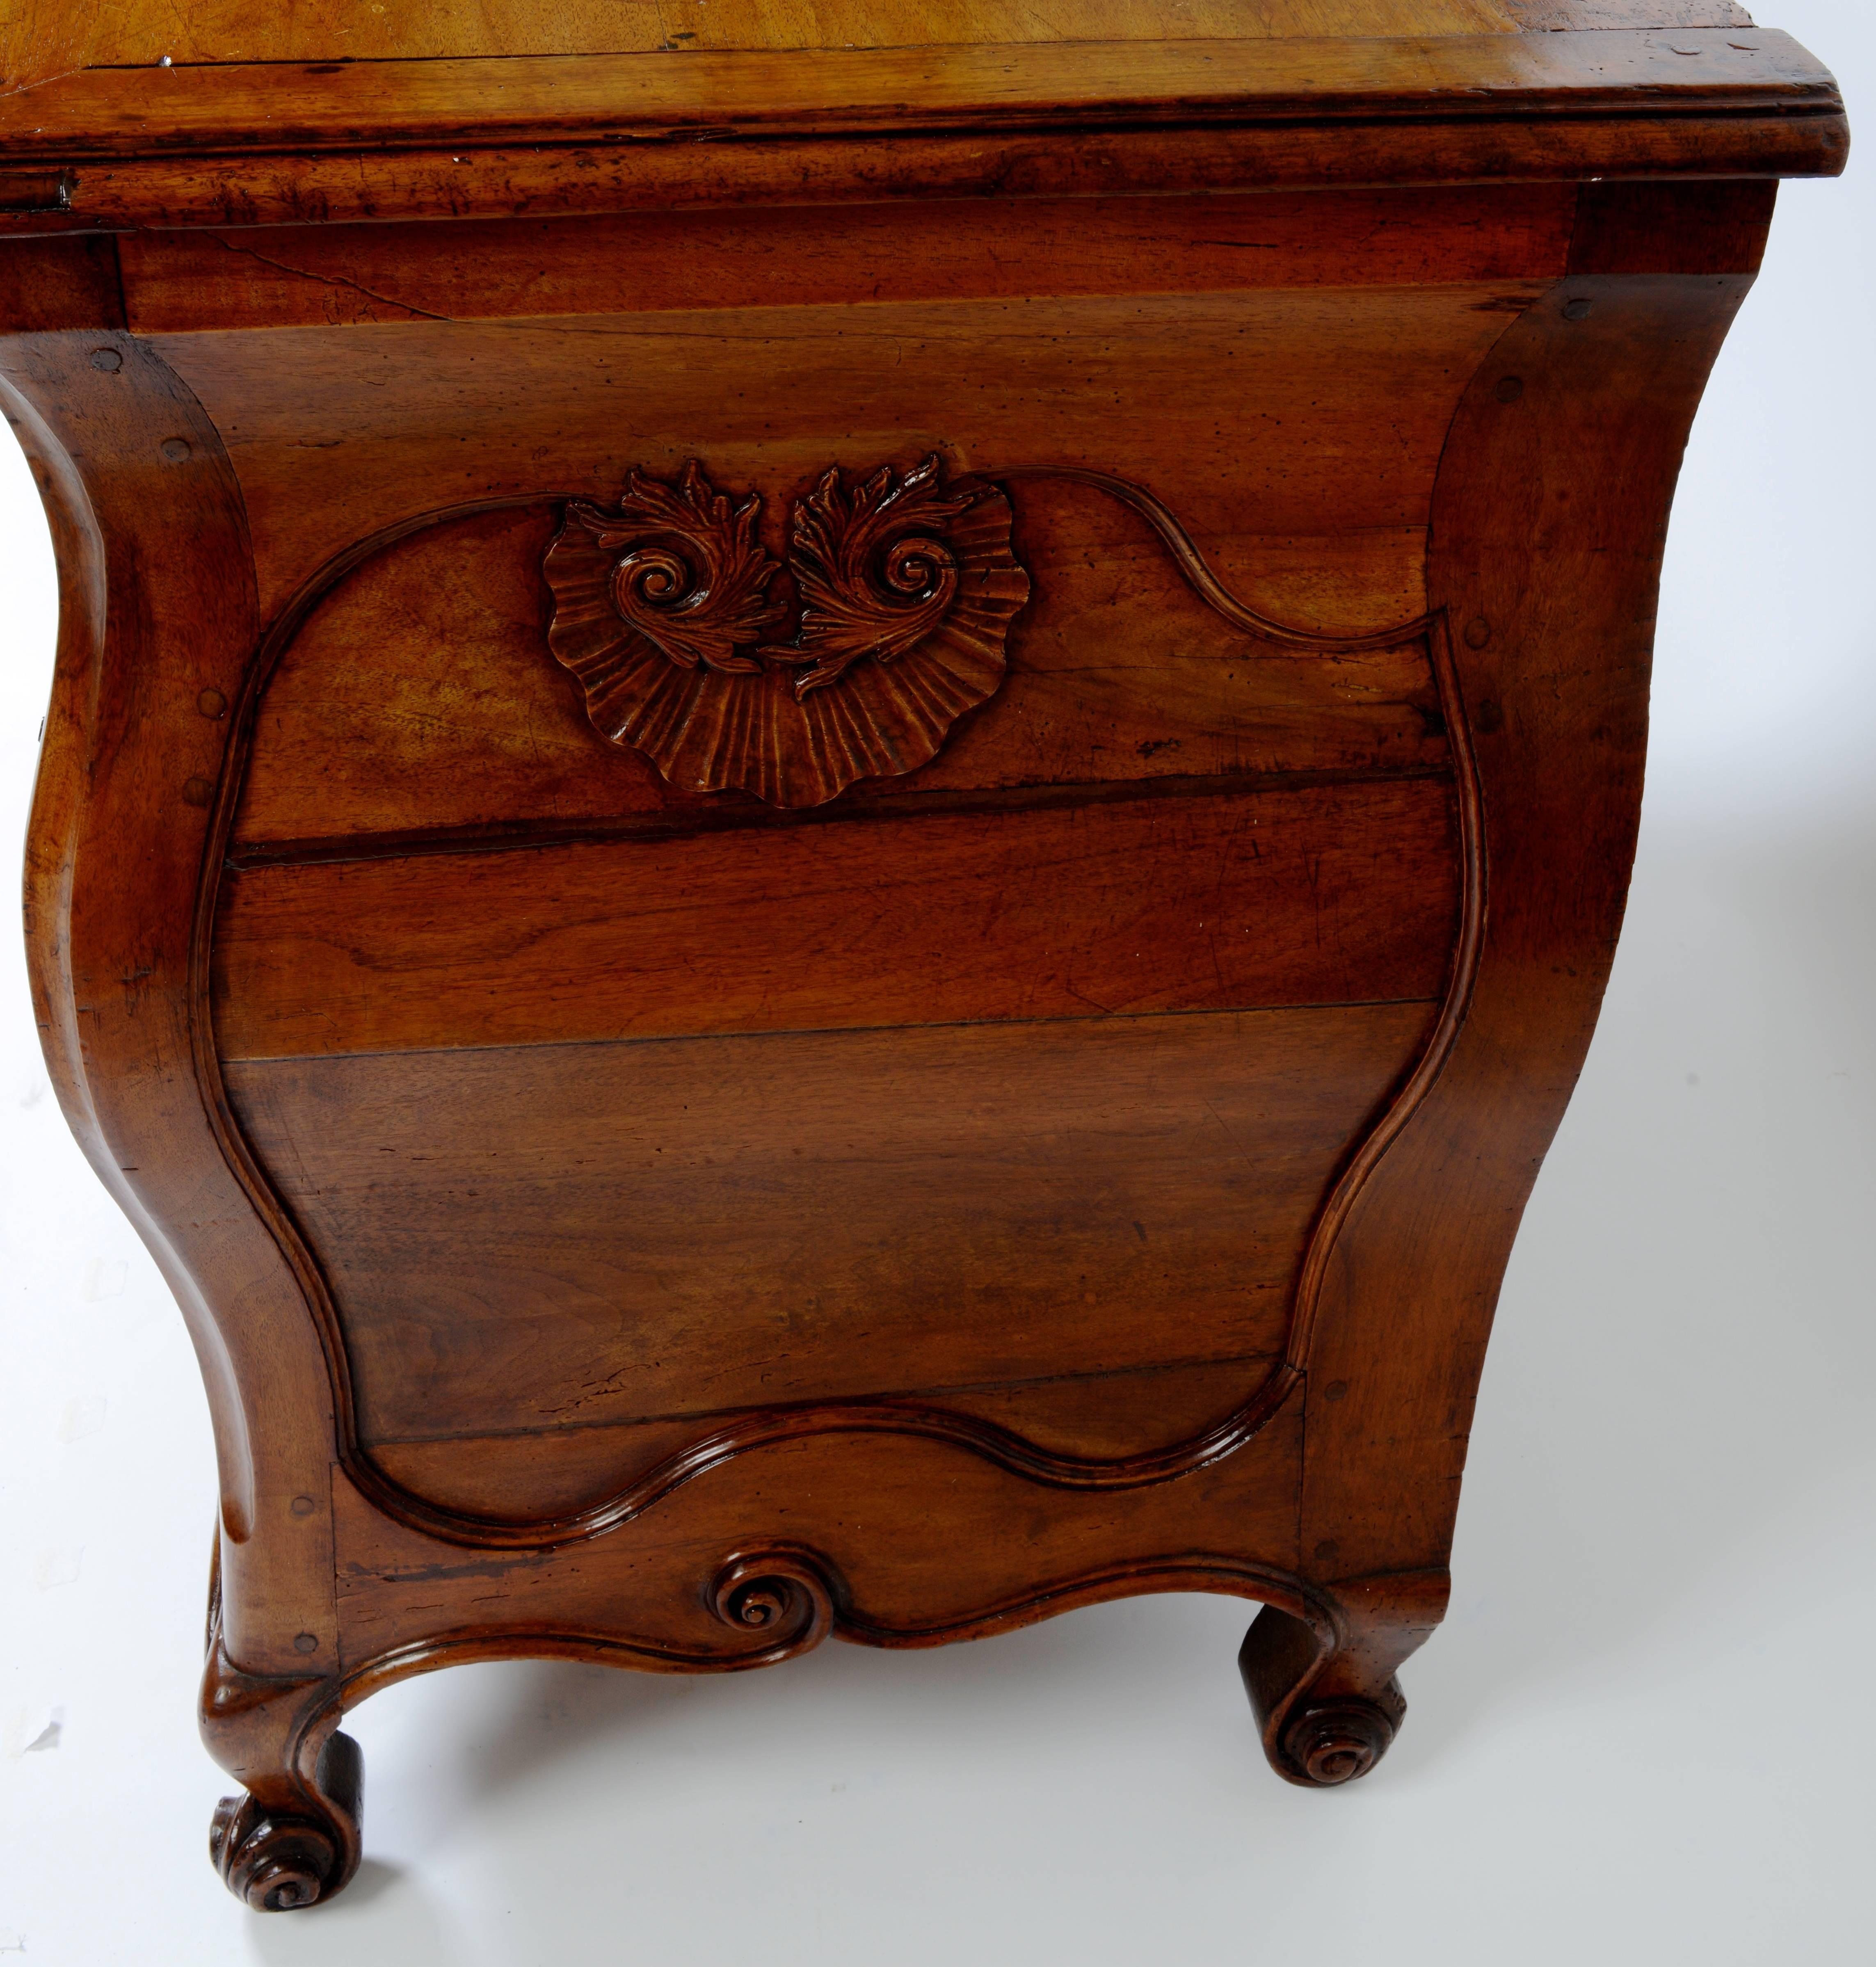 This exceptional walnut bombé commode from the Regence period. It has four beautifully shaped drawers with original rocaille decorated ormolu mounts. The top two drawers have a rare internal locking mechanism with integrated keys and pulls. When the